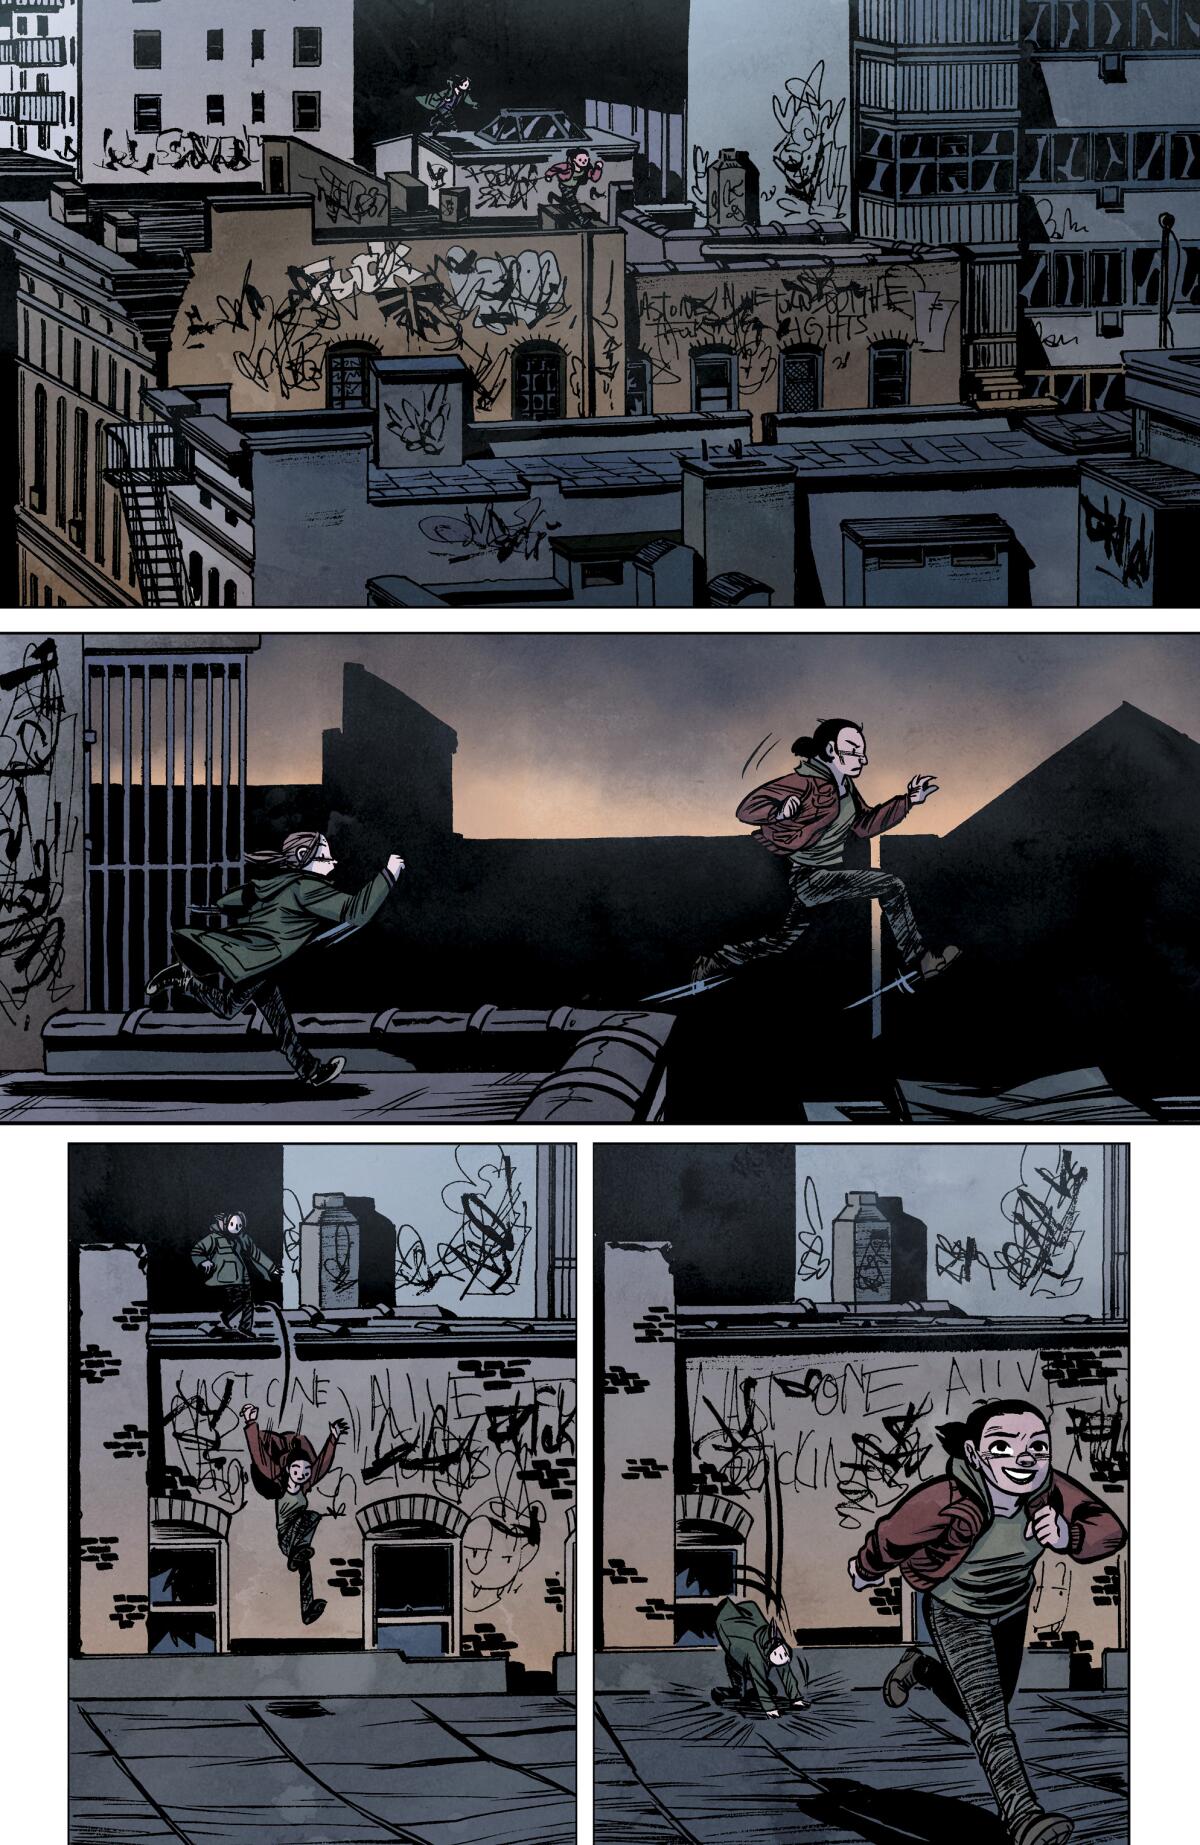 A comic page showing two girls running across rooftops